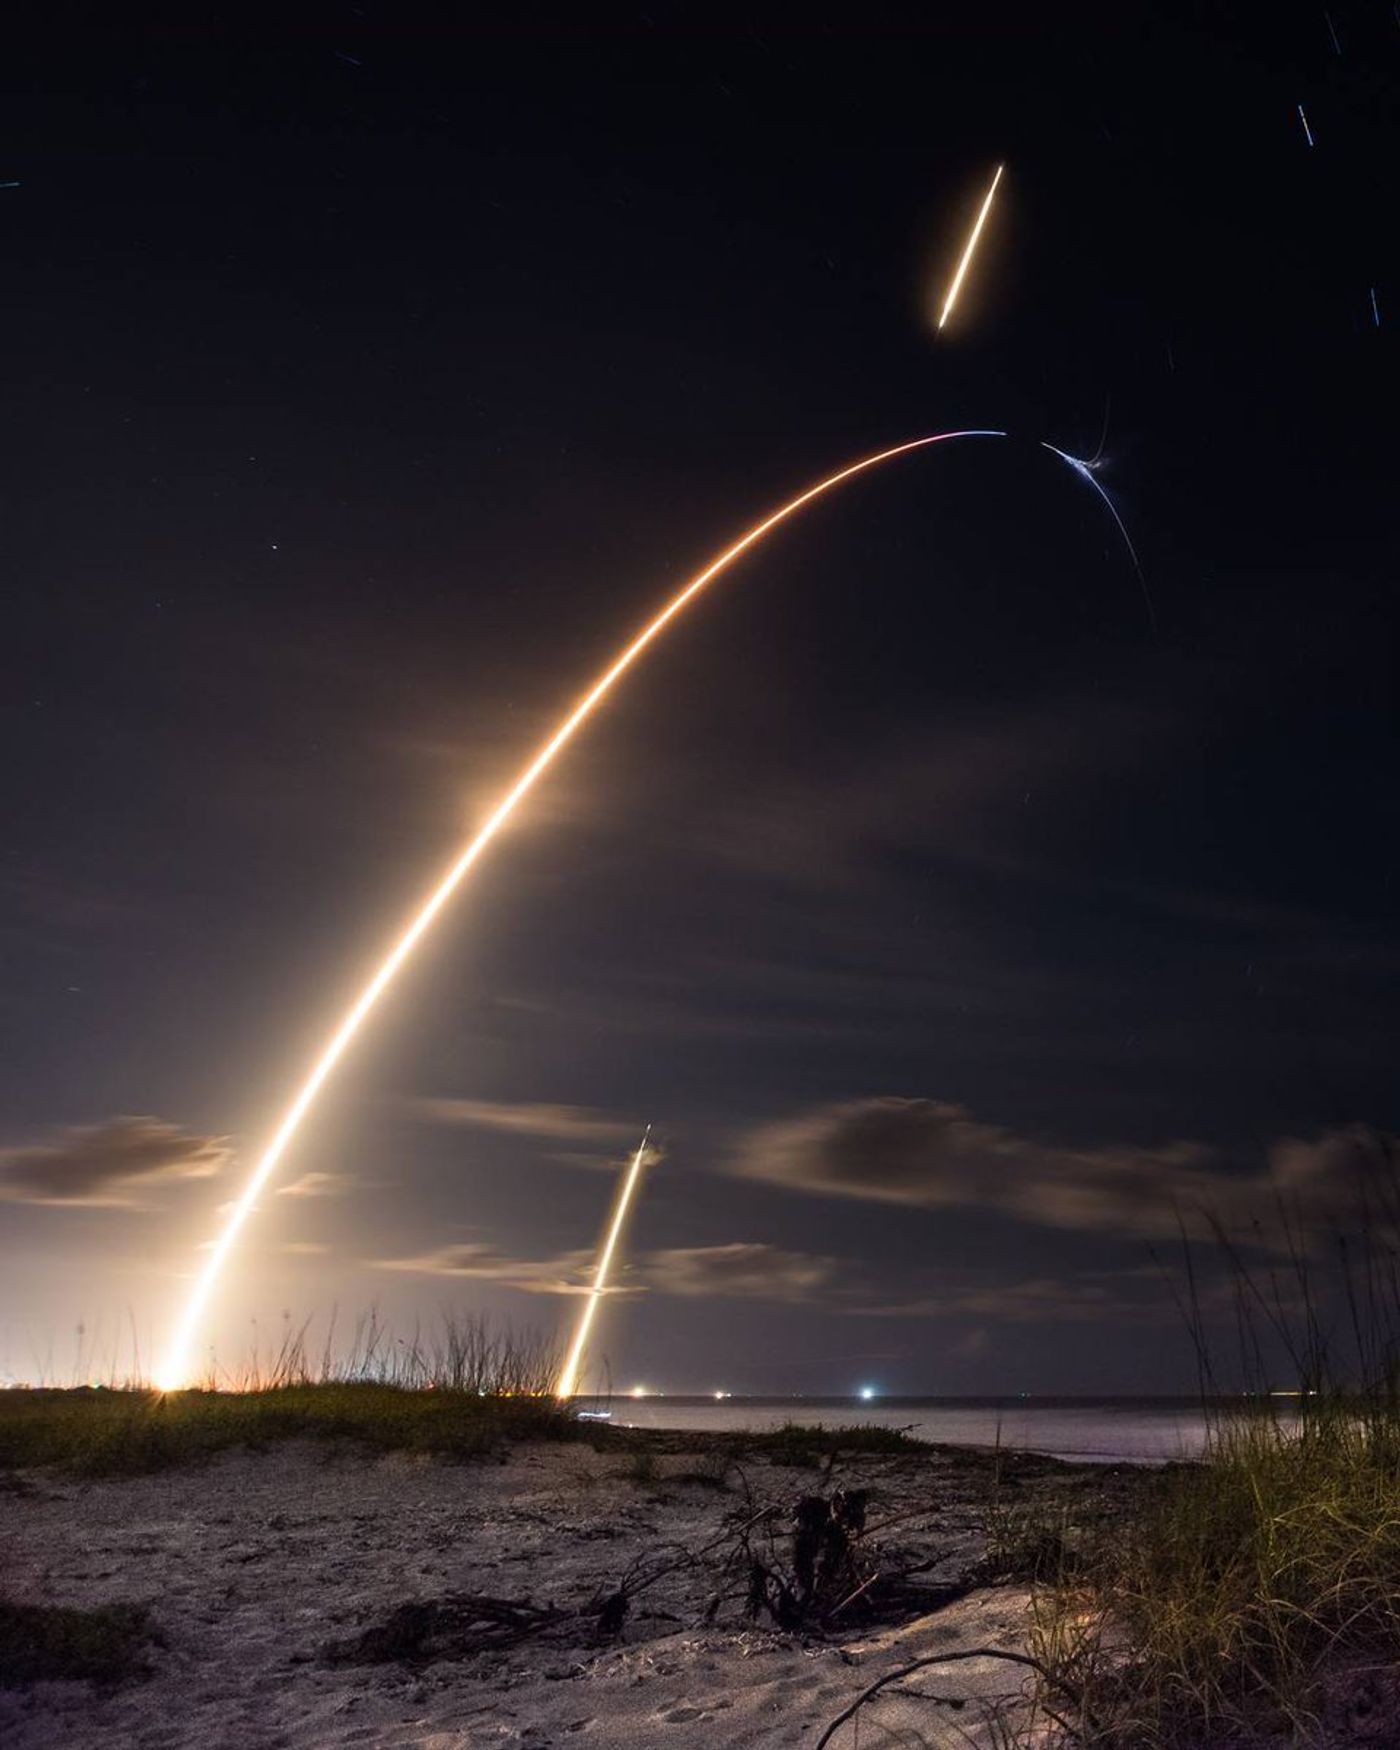 A time-lapse image showing the failed separation of SpaceX's Zuma mission.